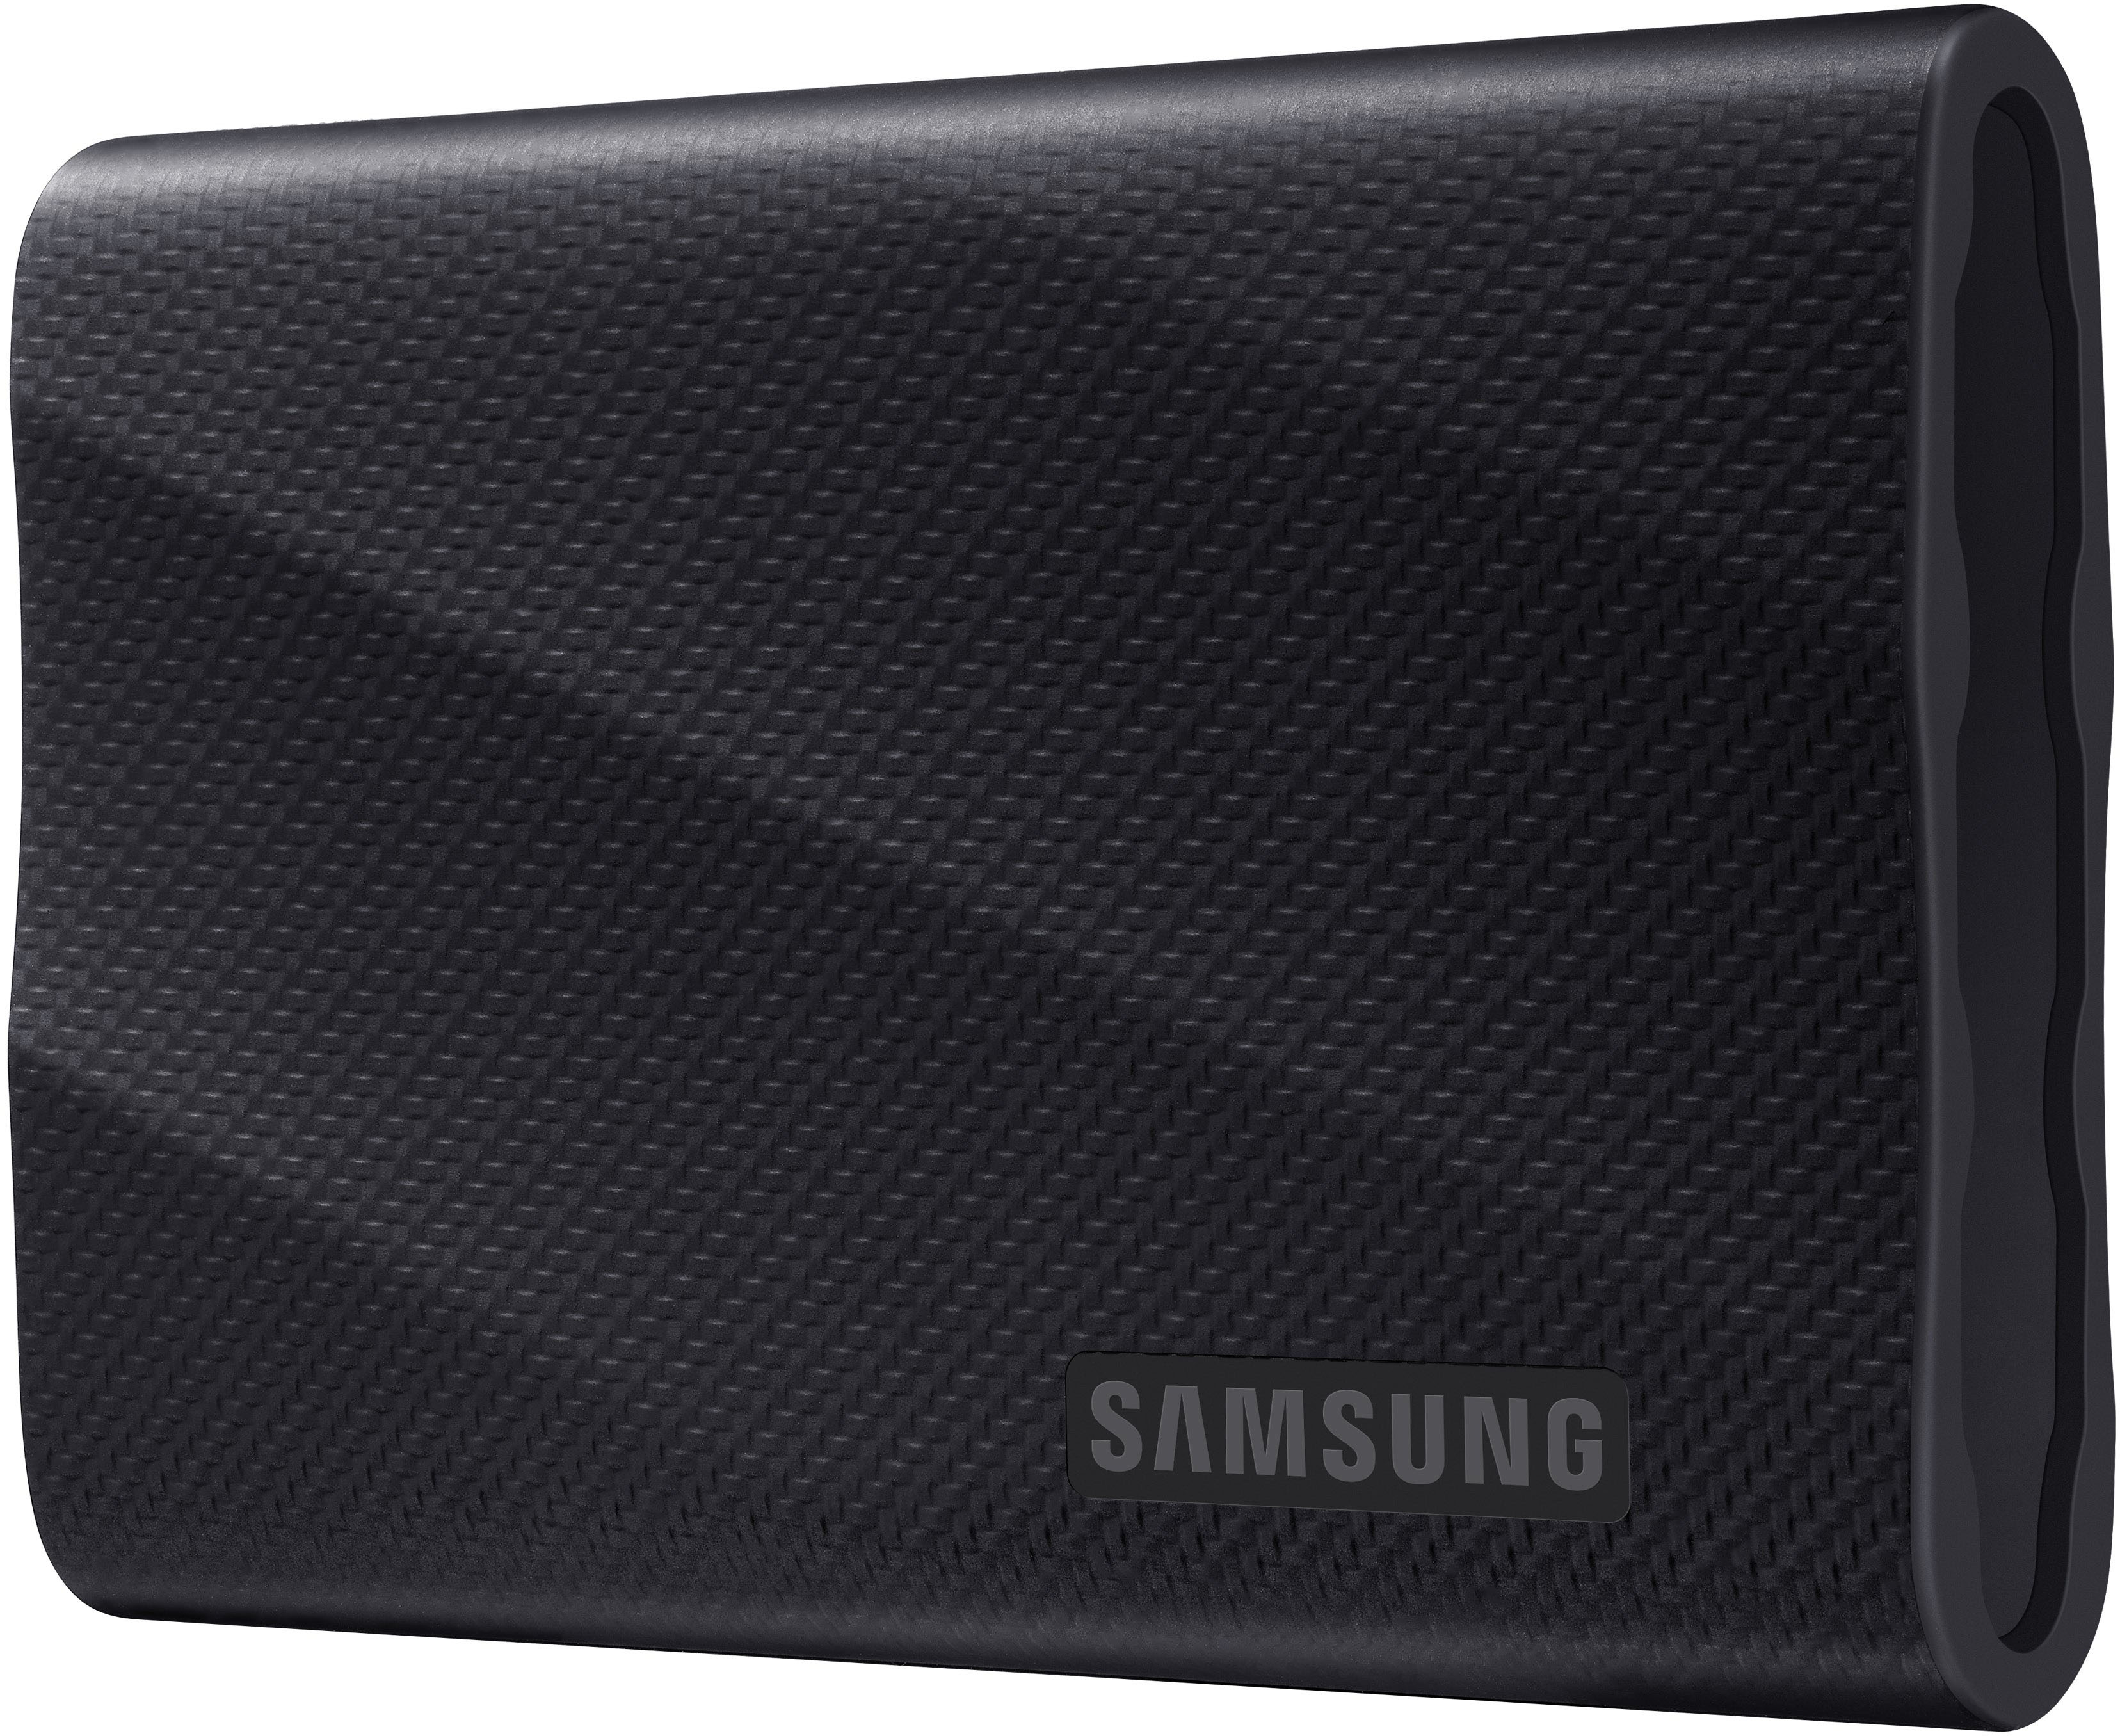 The Samsung T9 portable SSD has arrived with nearly double the